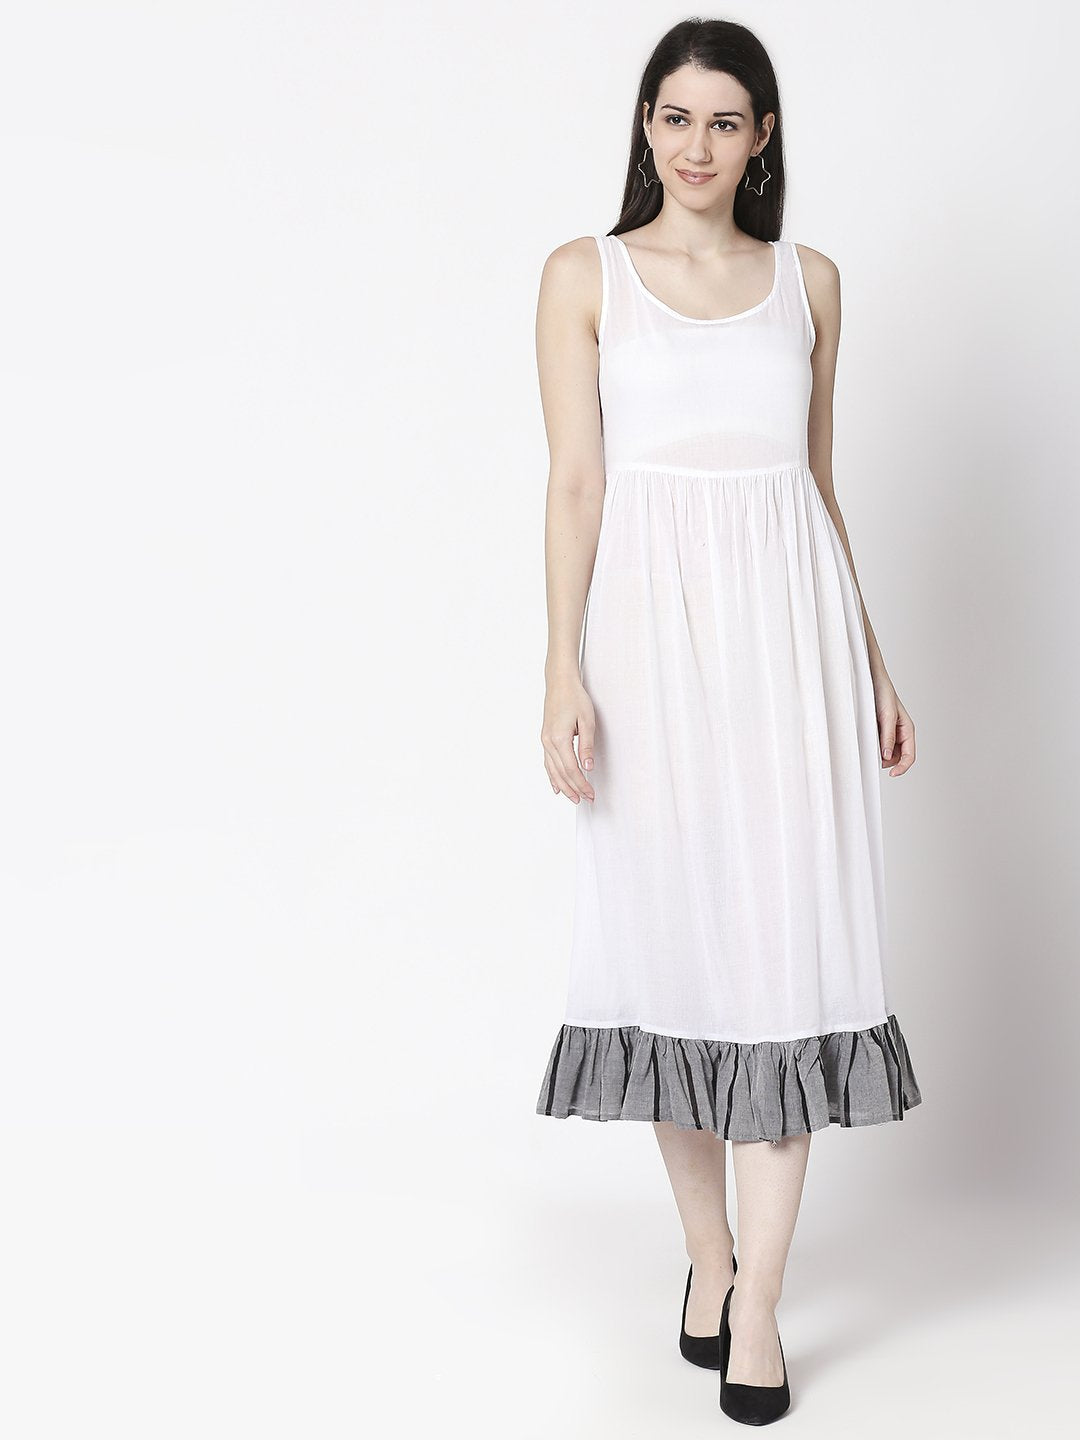 Terquois classic stripe & checks layered dress with braided belt Dresses TERQUOIS   